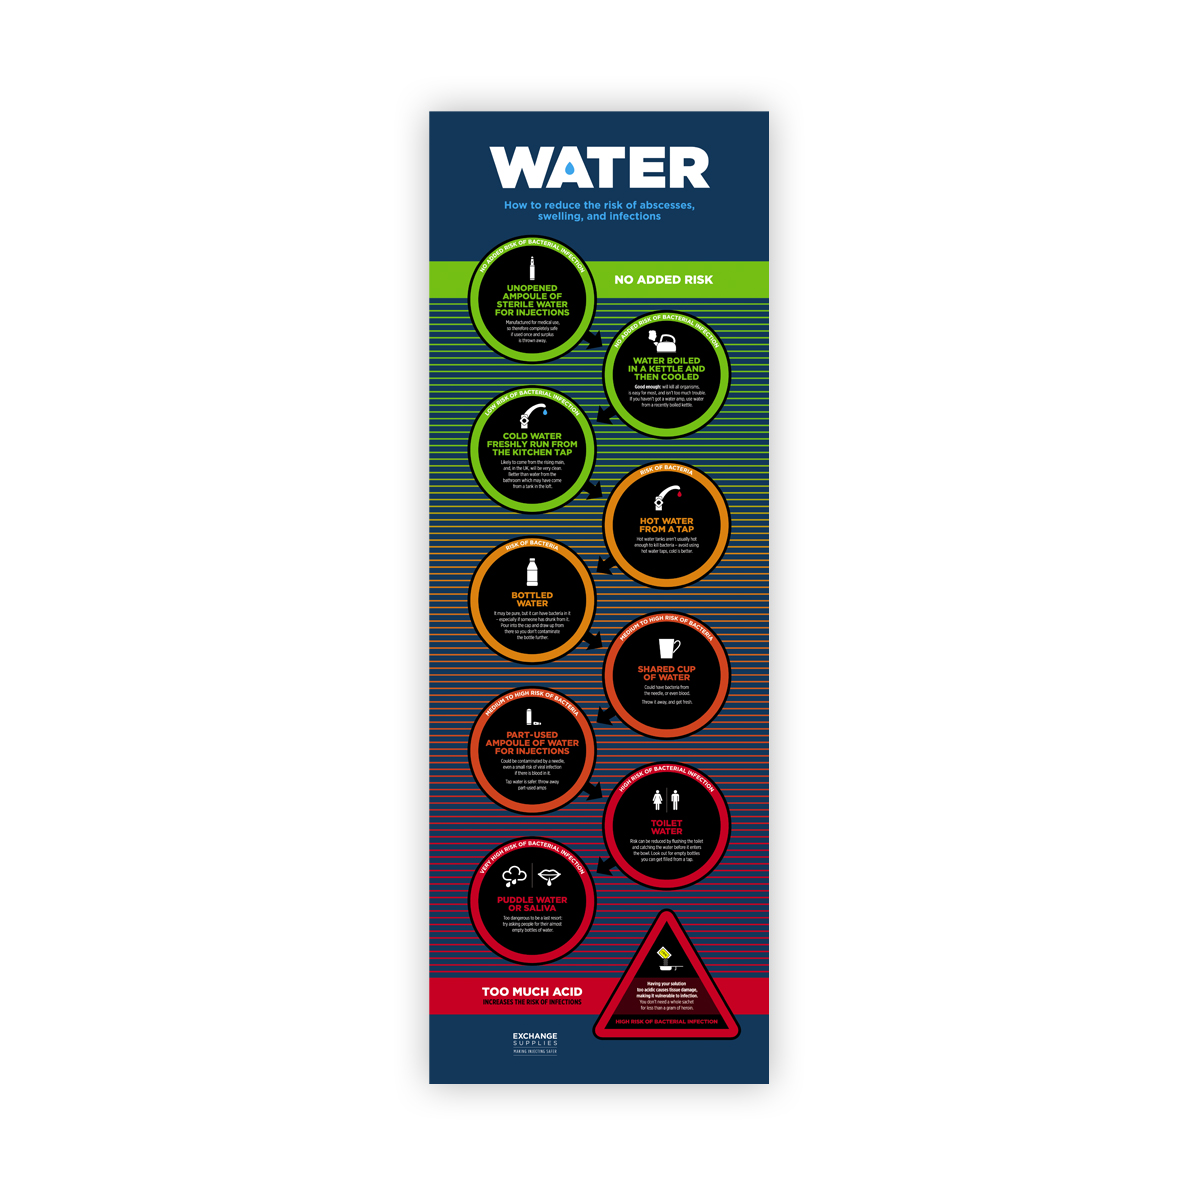 Water Poster (New Edition)